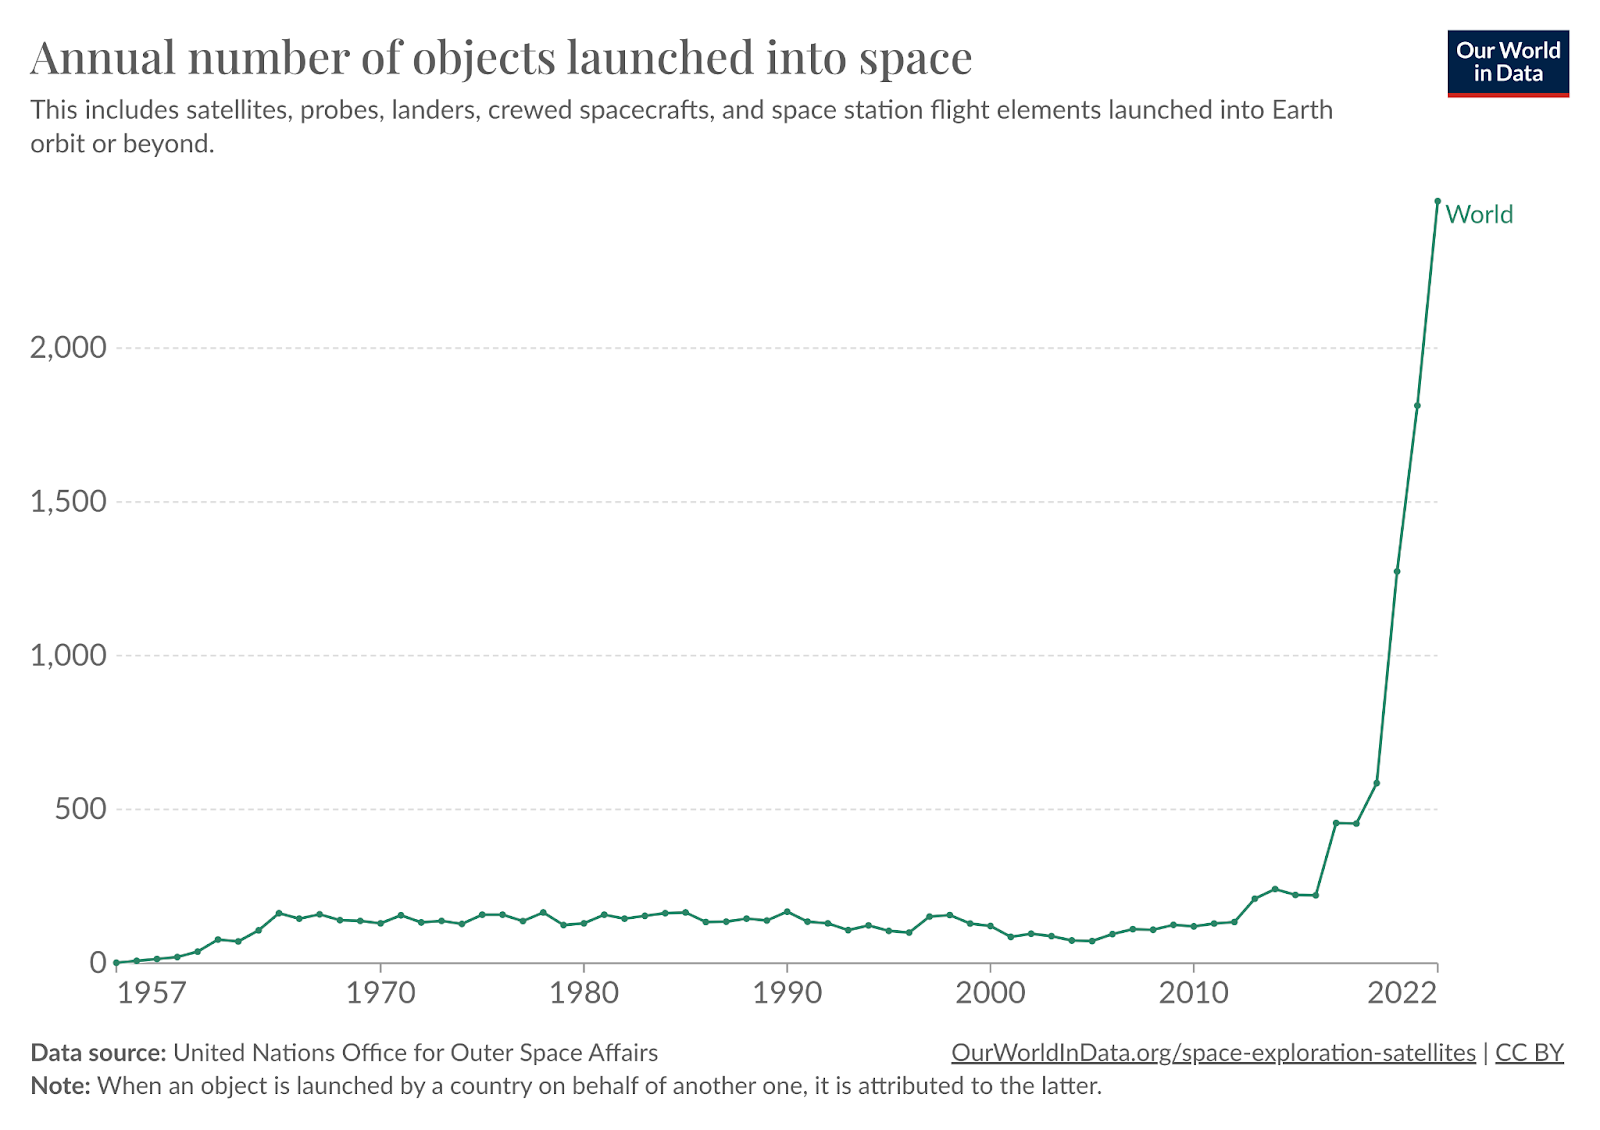 Annual number of space debris launched into space.